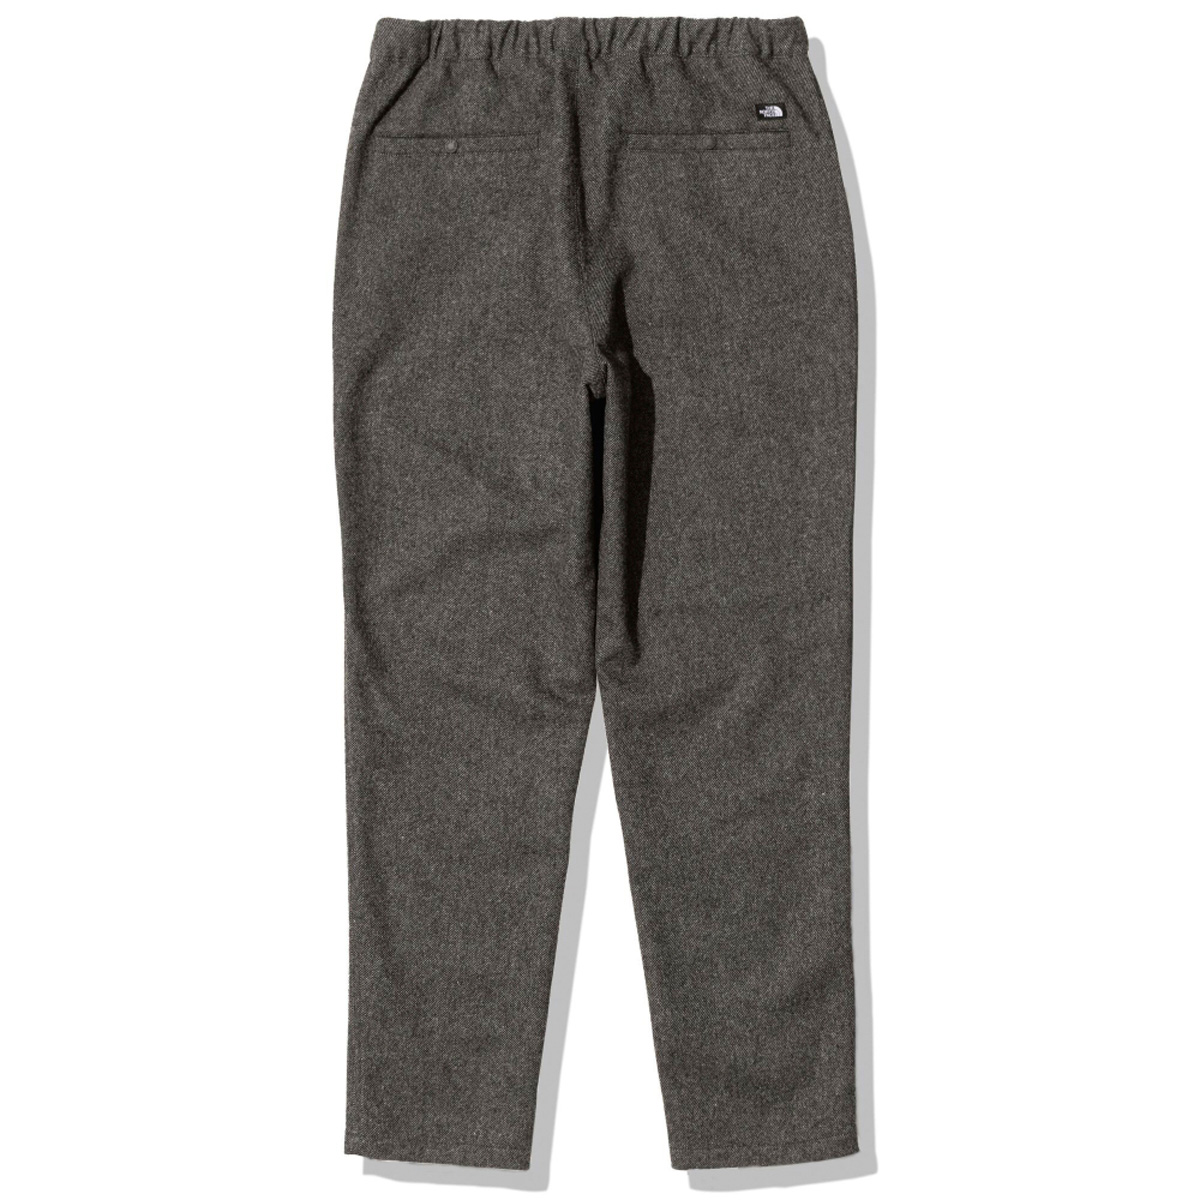 THE NORTH FACE◆BRUSHWOOD WOOL PANTS